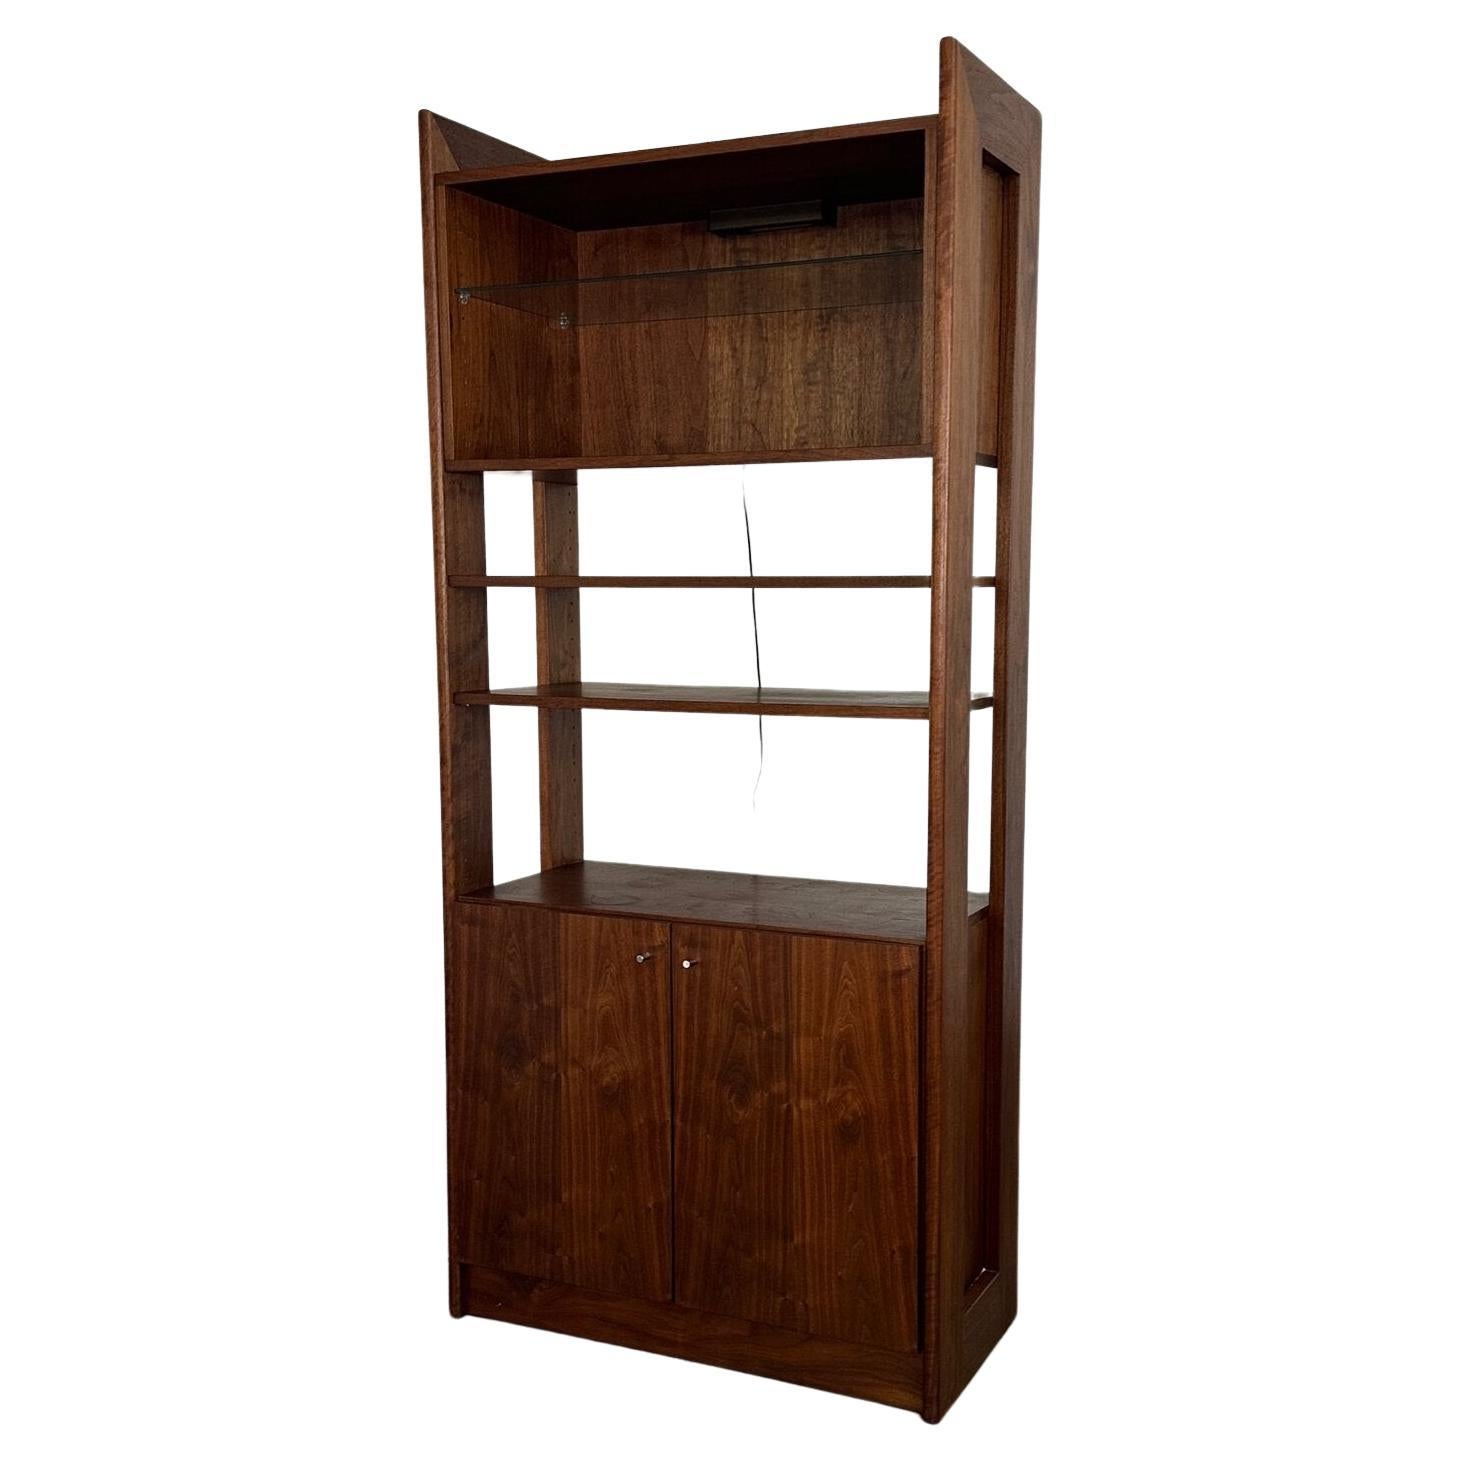 Barzilay style free standing bookcase #1 For Sale